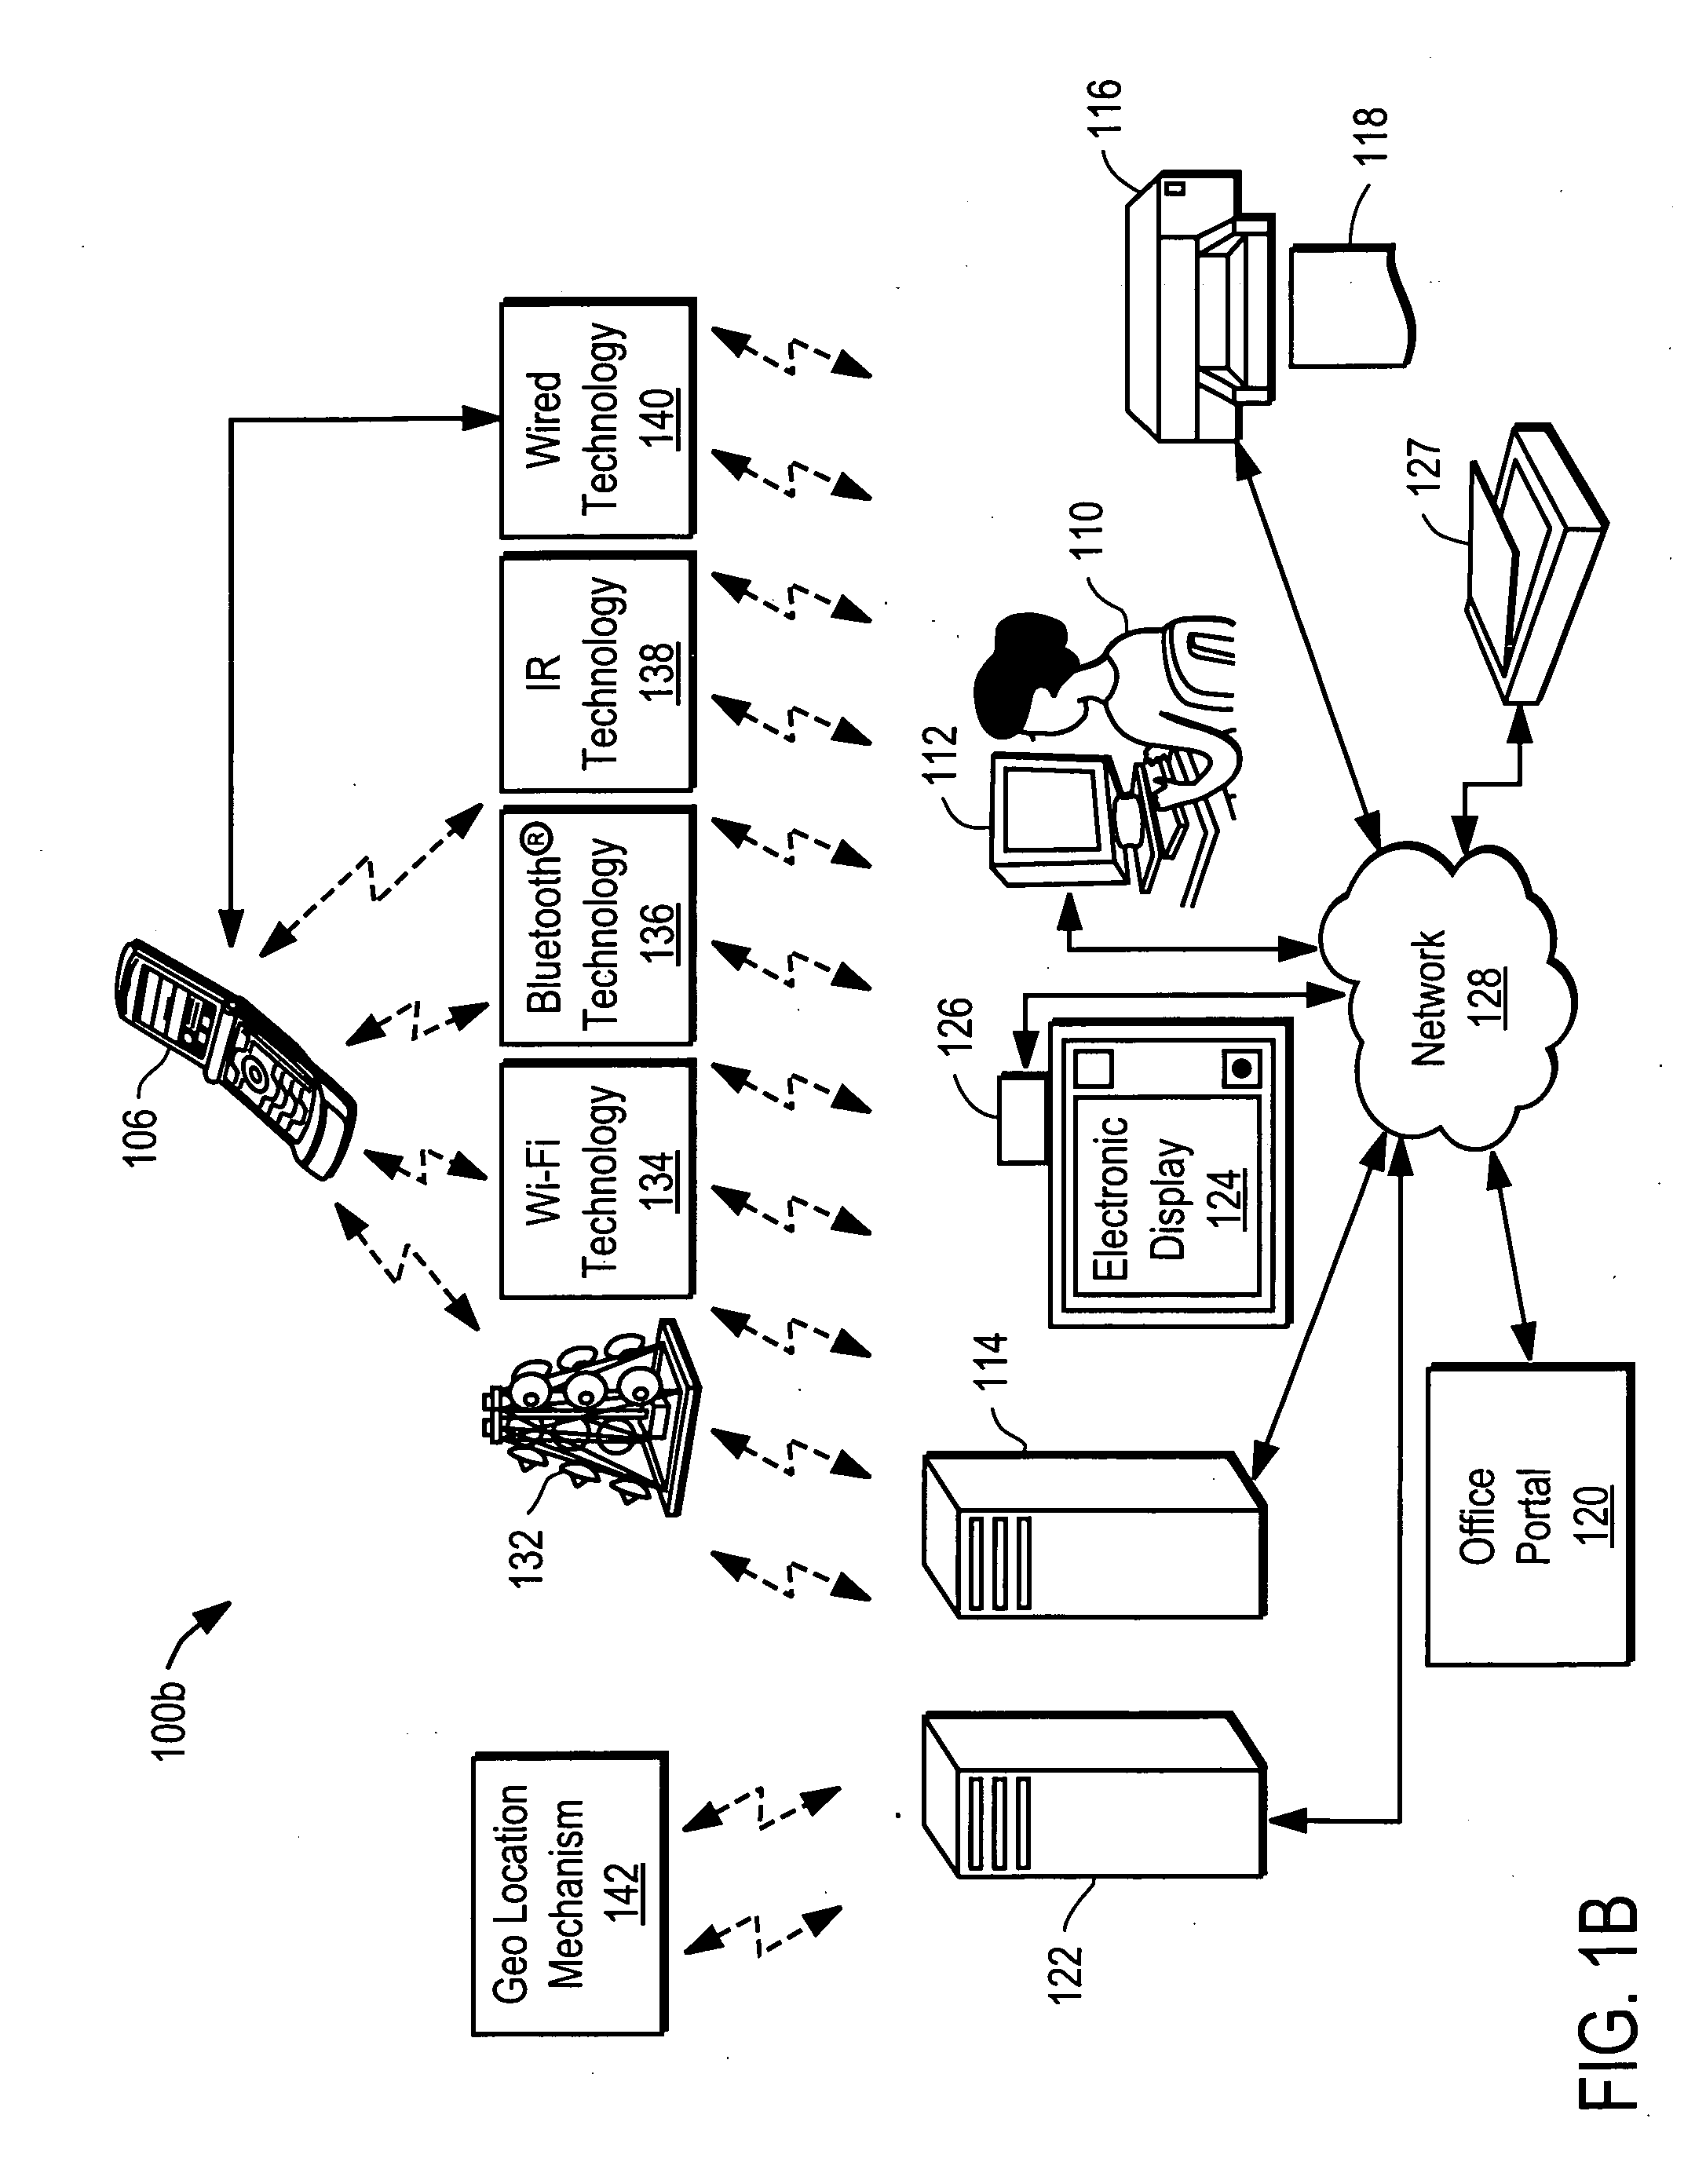 System and Method for Using Individualized Mixed Document